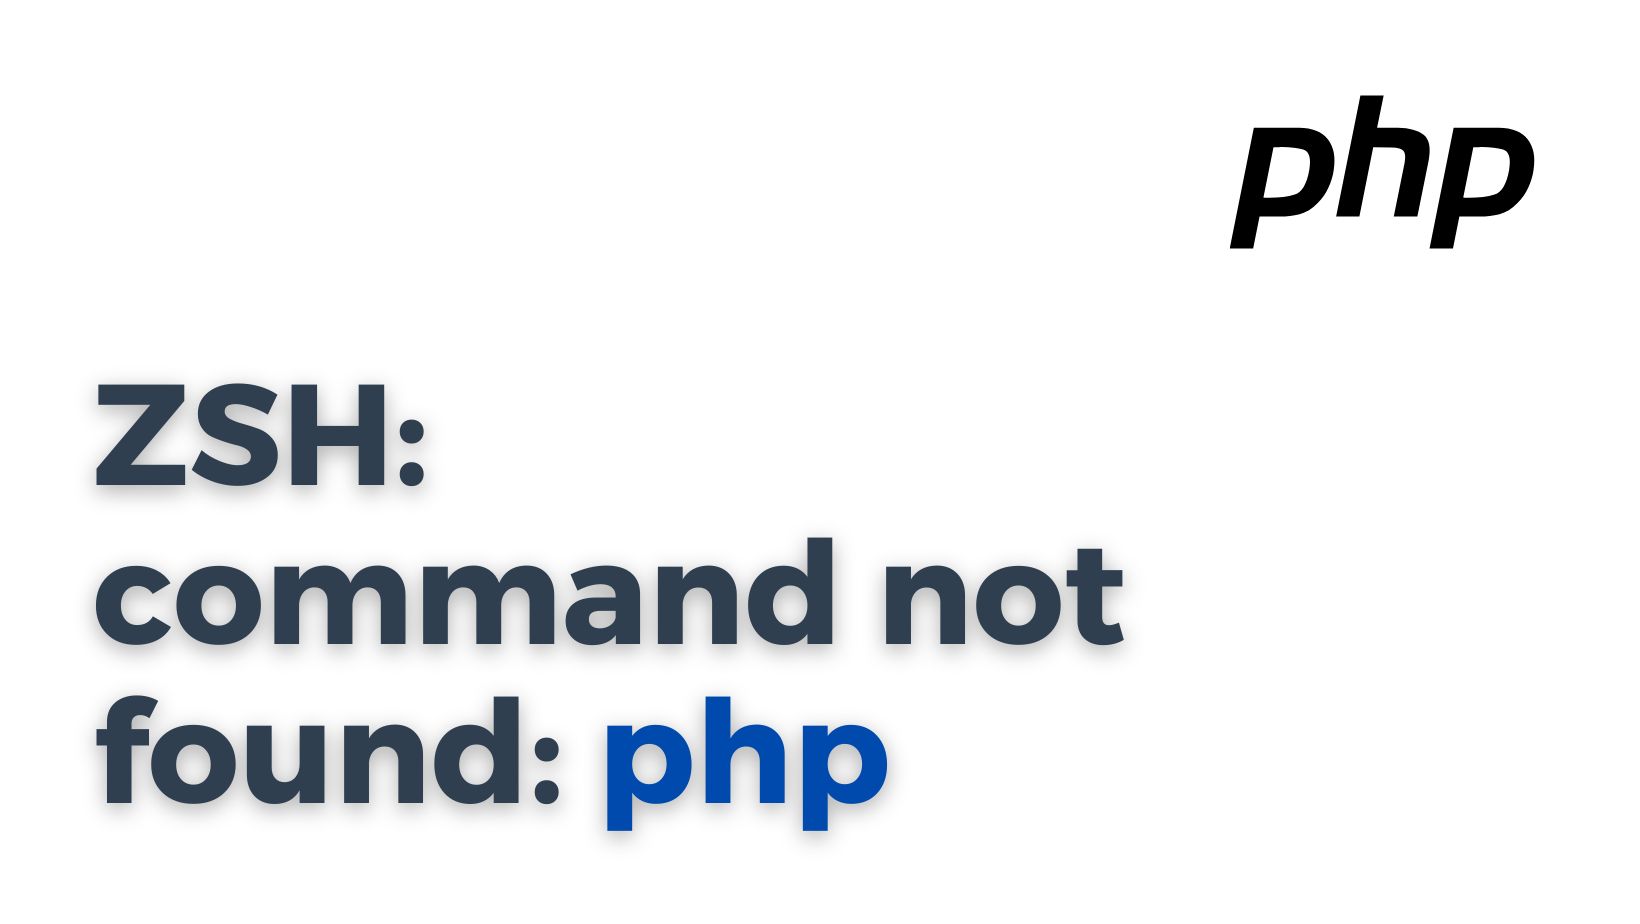 ZSH: command not found: php